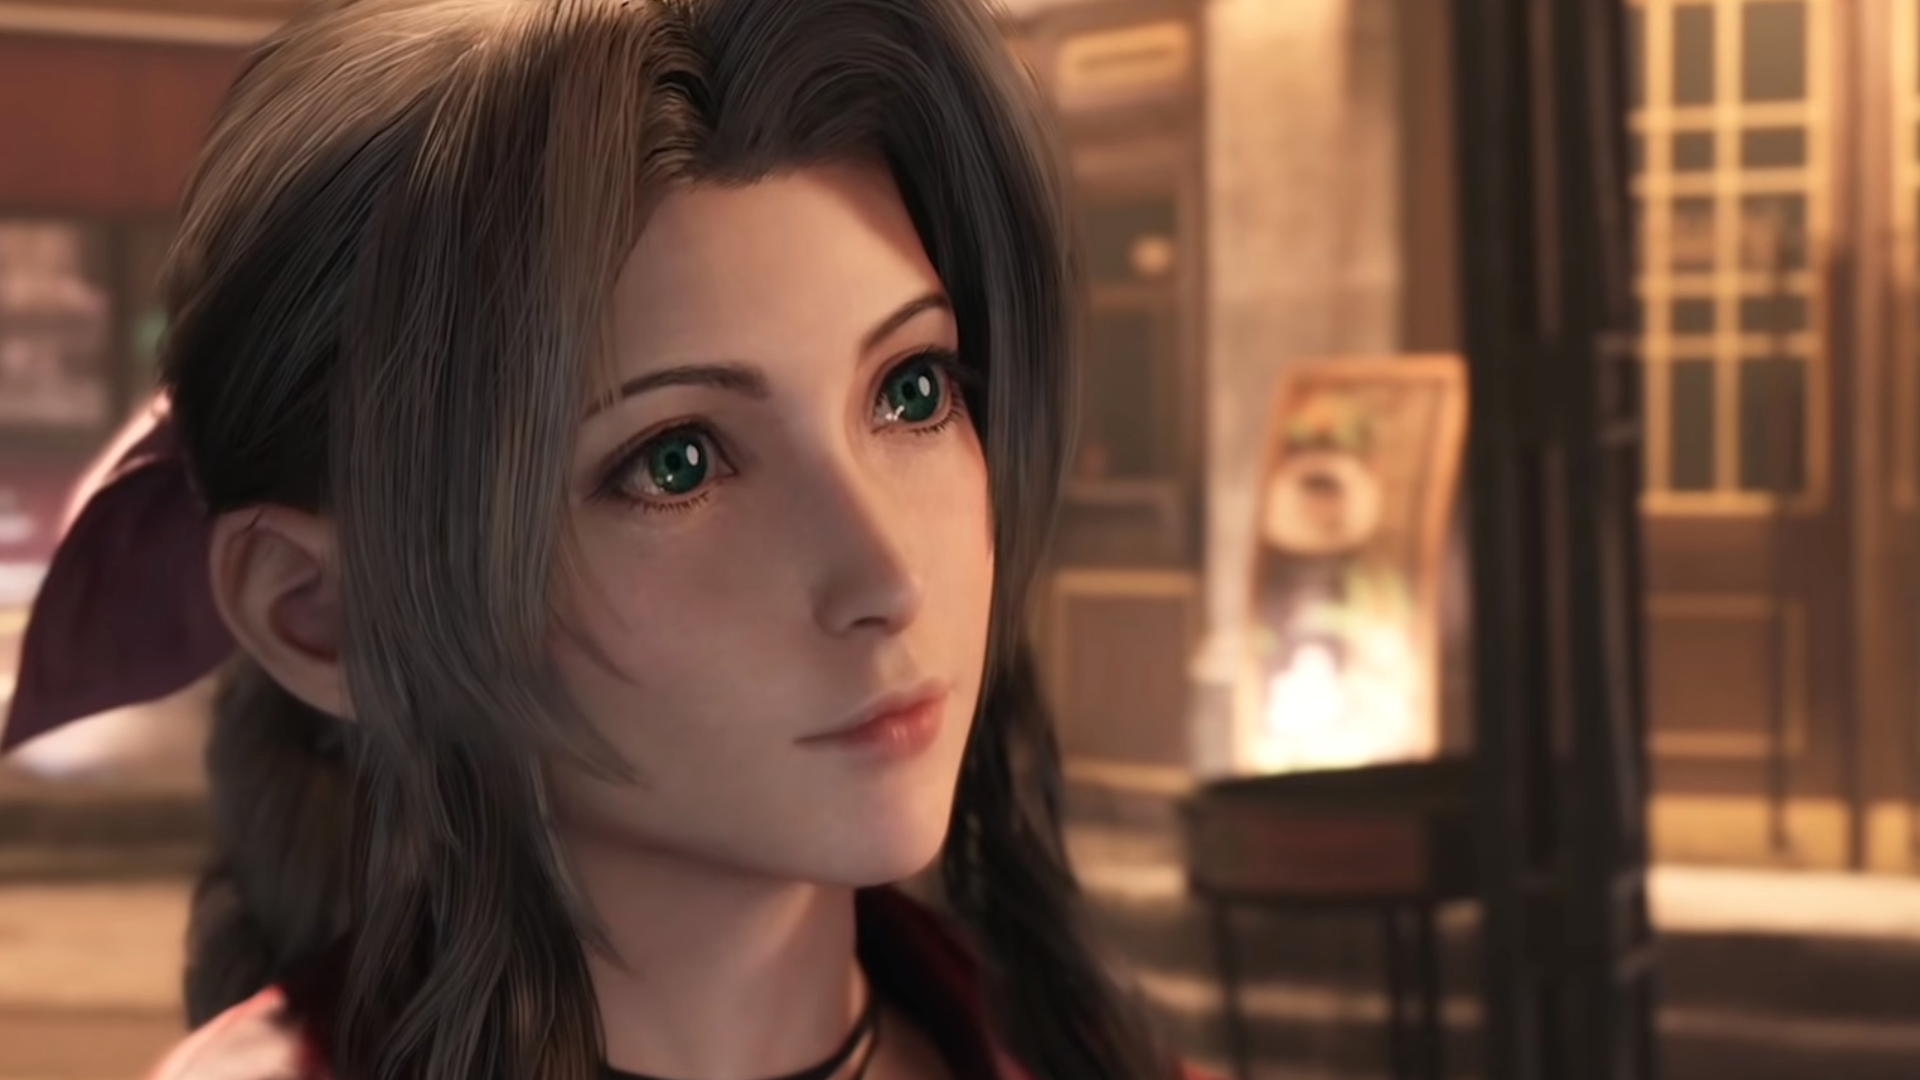 Final Fantasy 7 Remake's final scene gets a script change 2 days before its sequel drops, and it's going down about as well as you'd expect